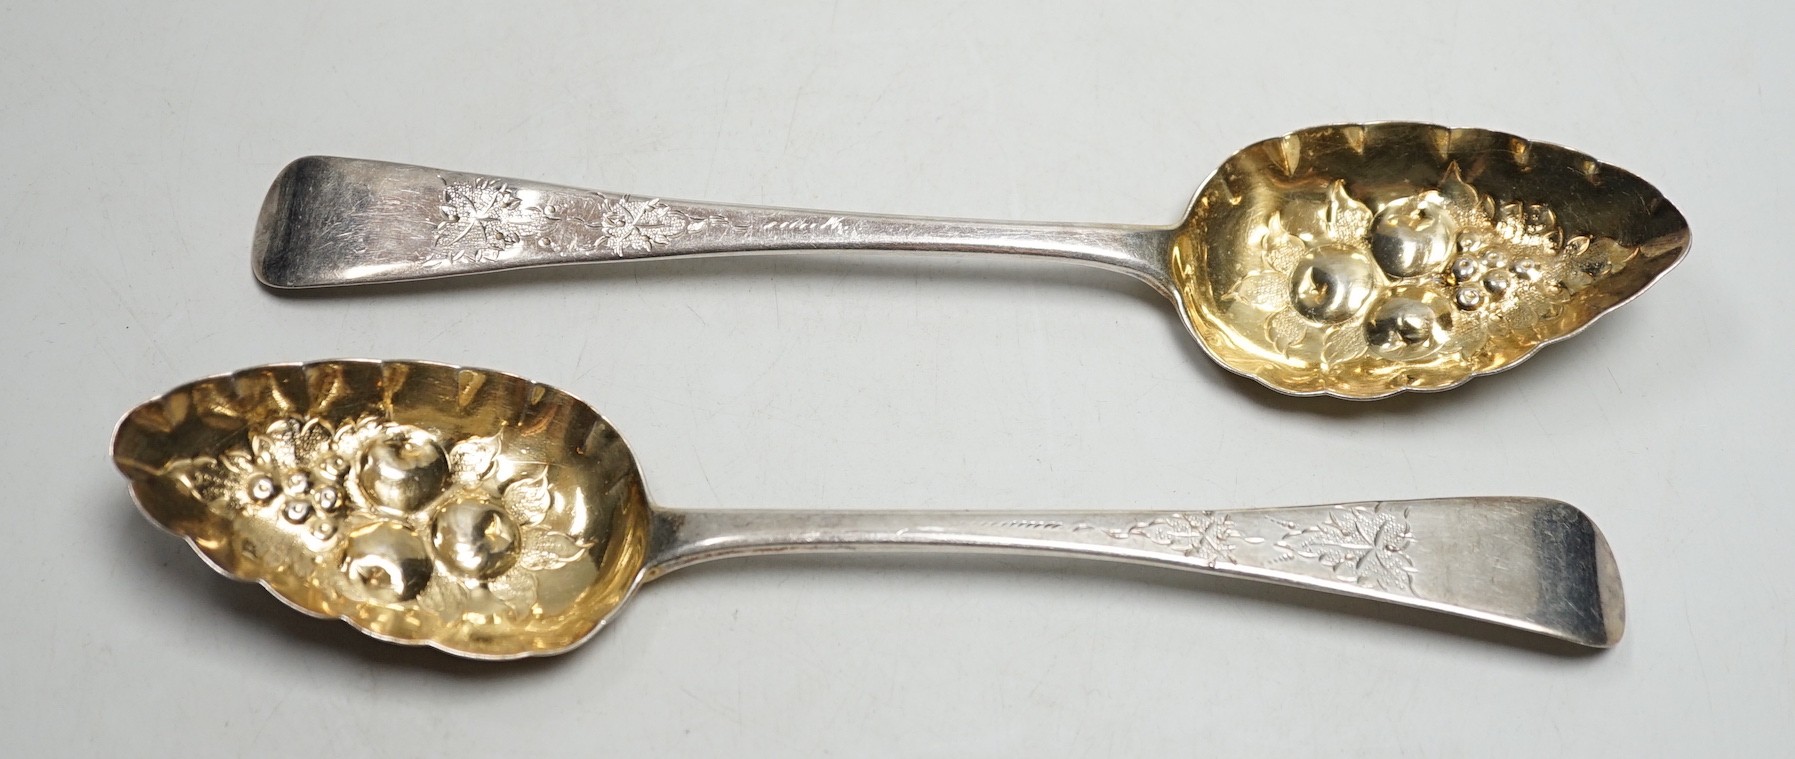 A pair of George IV silver Old English pattern 'berry' spoons, William Scofield, London, 1826, 22.5cm, 4.1oz.                                                                                                               